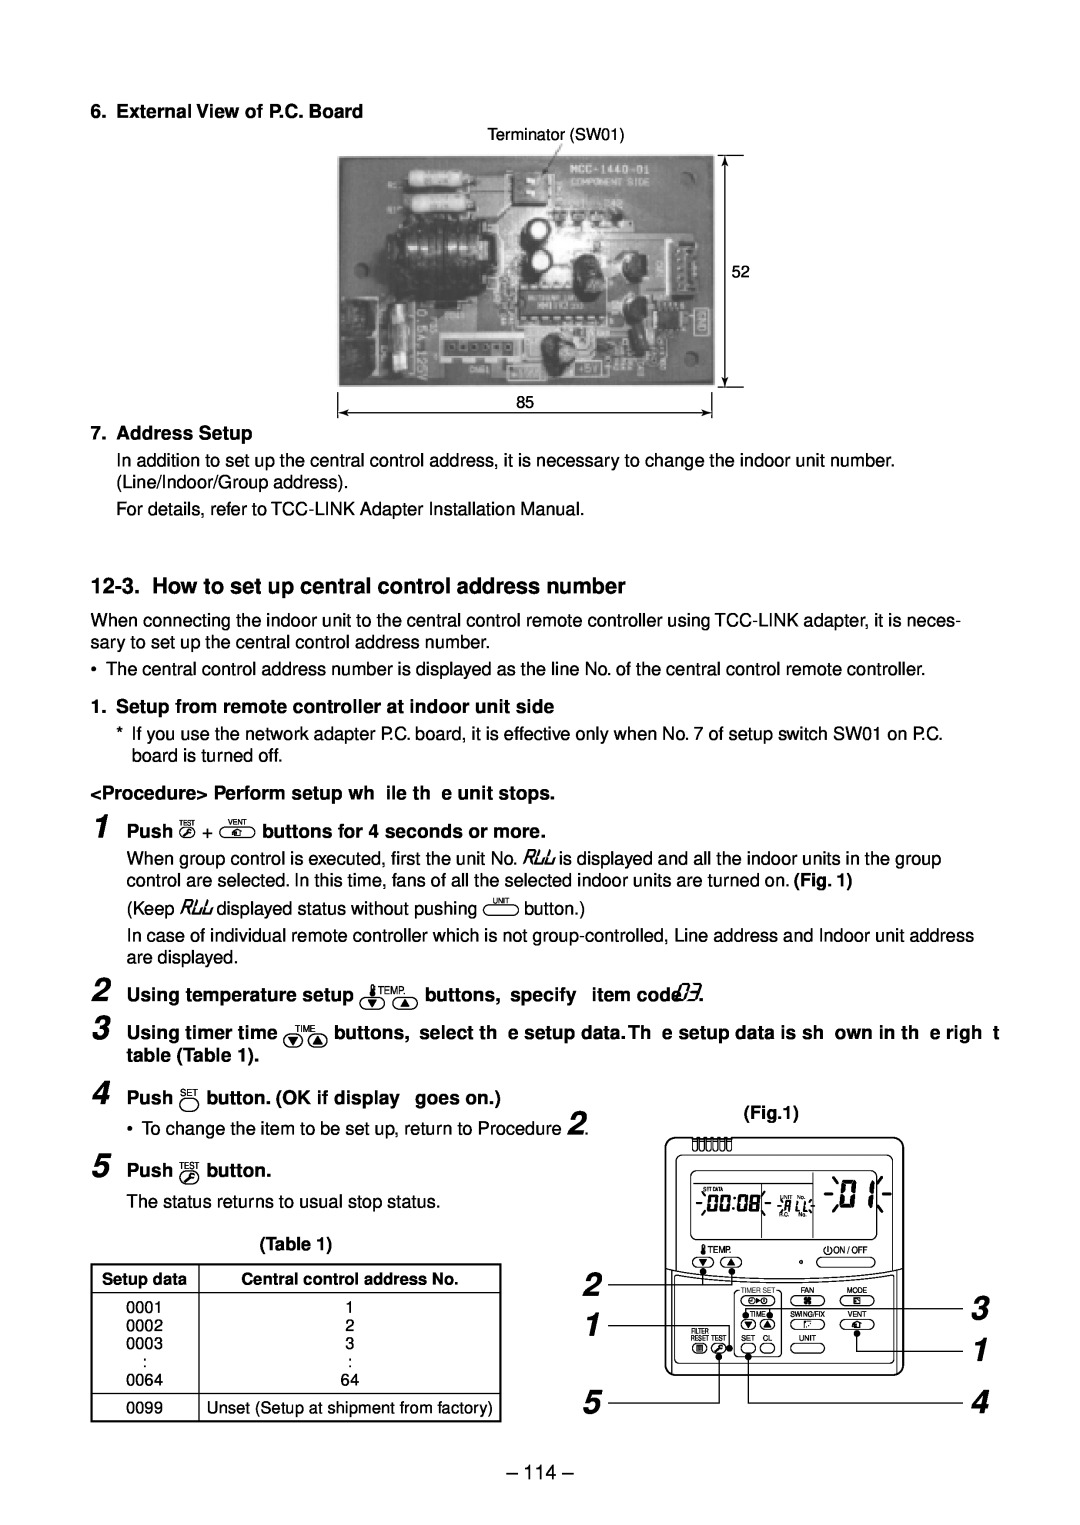 Toshiba RAV-SM802UT-E, RAV-SM1102UT-E, RAV-SM1402UT-E service manual 2 1 5, How to set up central control address number, 114 